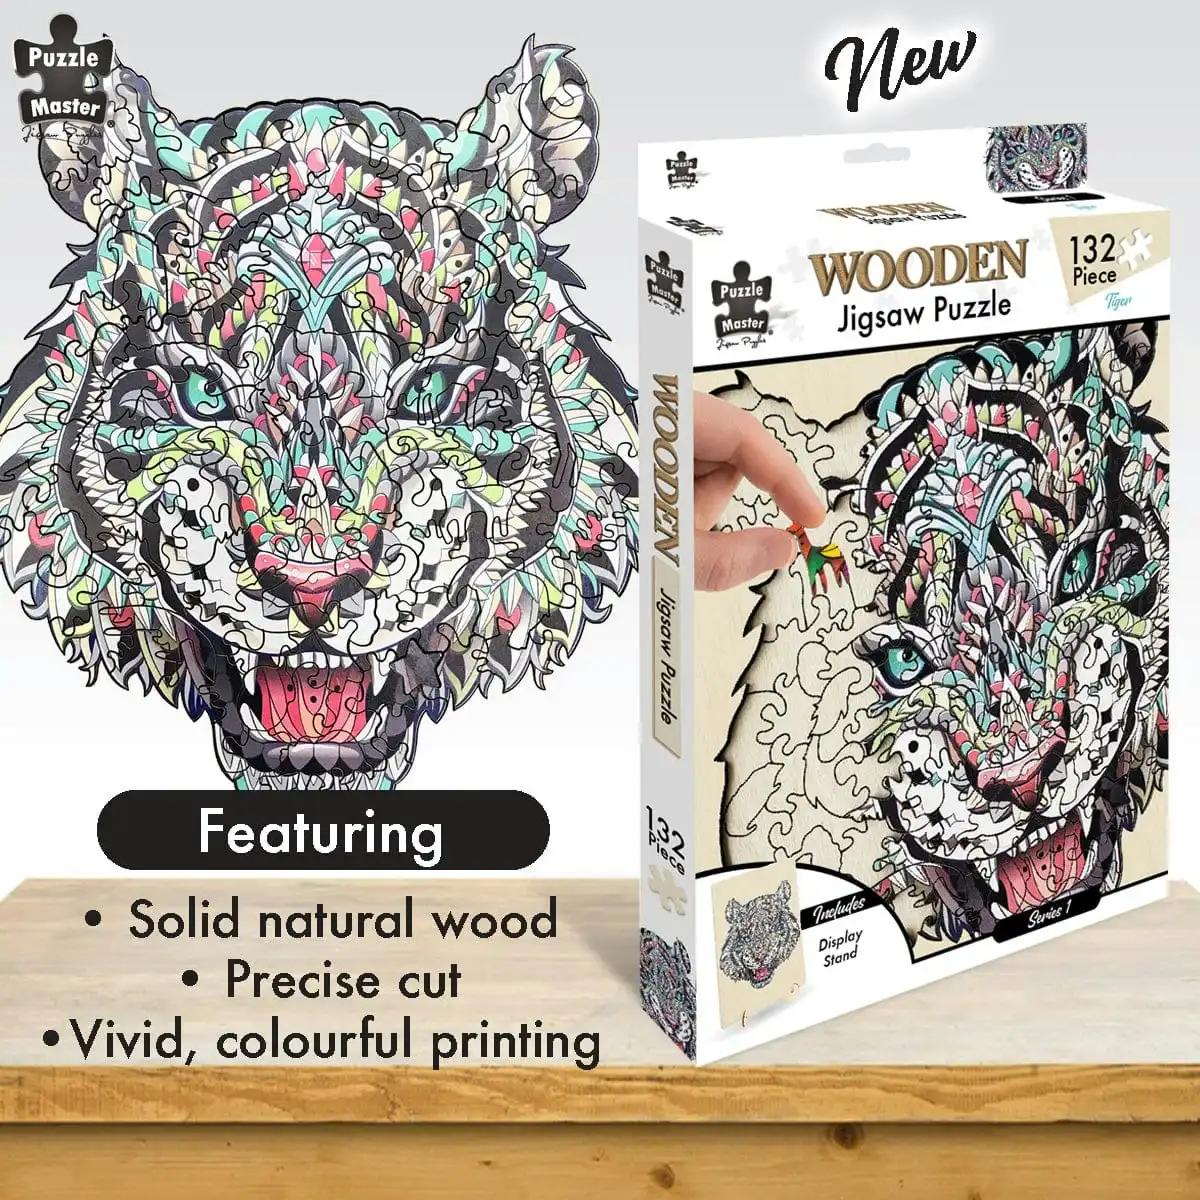 Puzzle Master 132 Piece Wooden Jigsaw Puzzle, Tiger